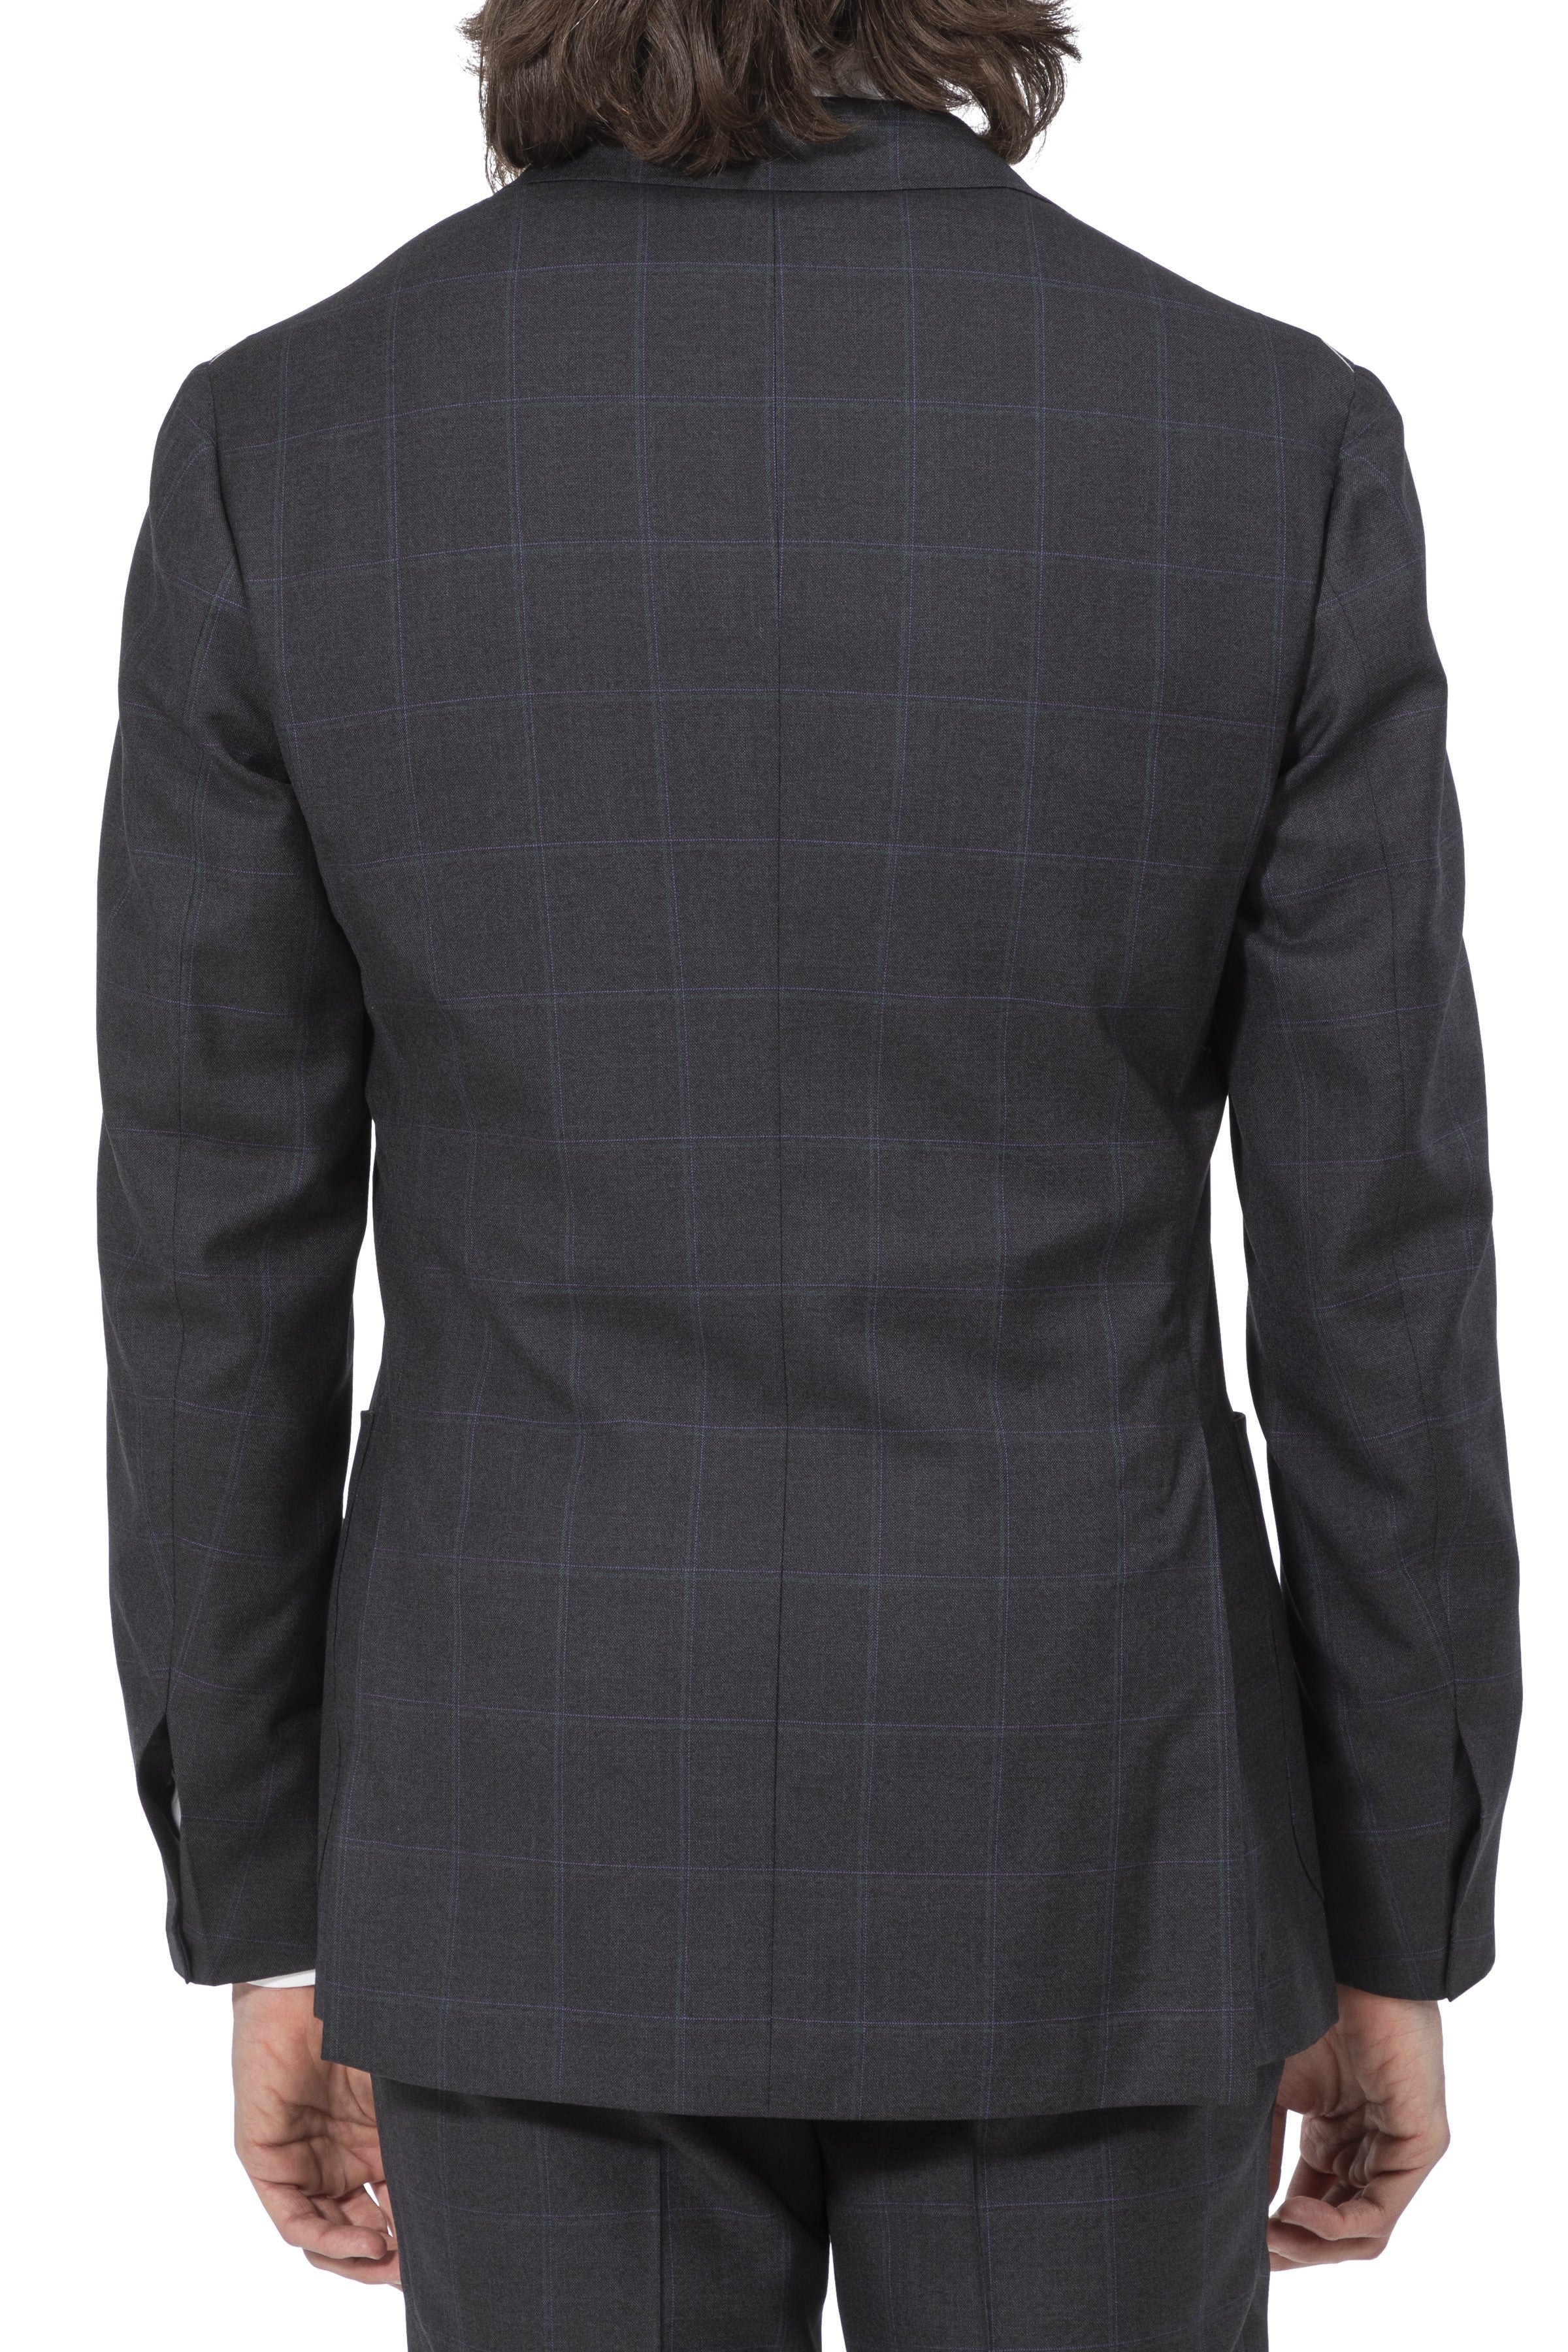 The Armoury by Ring Jacket Model 3A Dark Grey With Green-Purple Check Wool Suit